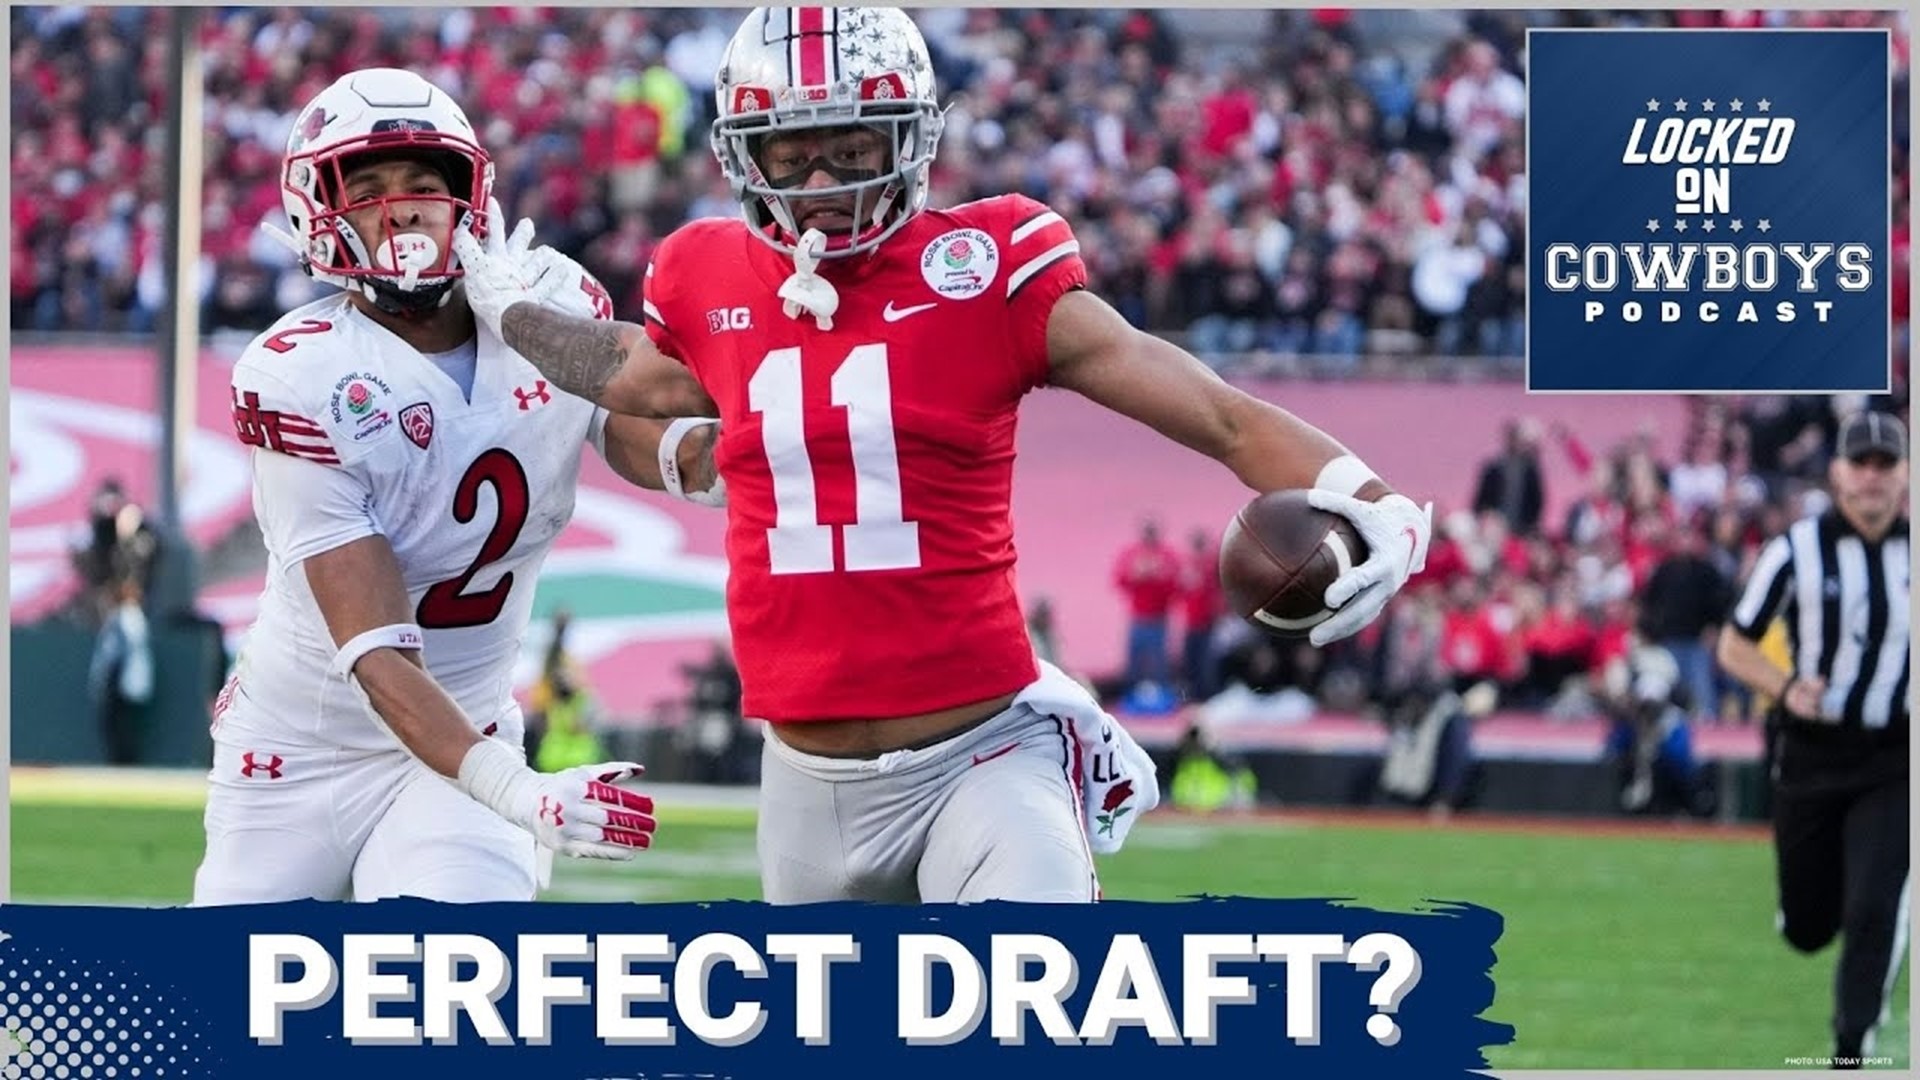 Marcus Mosher and Landon McCool reveal what the perfect draft class would look like for the Dallas Cowboys. Who could fall to No. 26 that has a first-round grade?